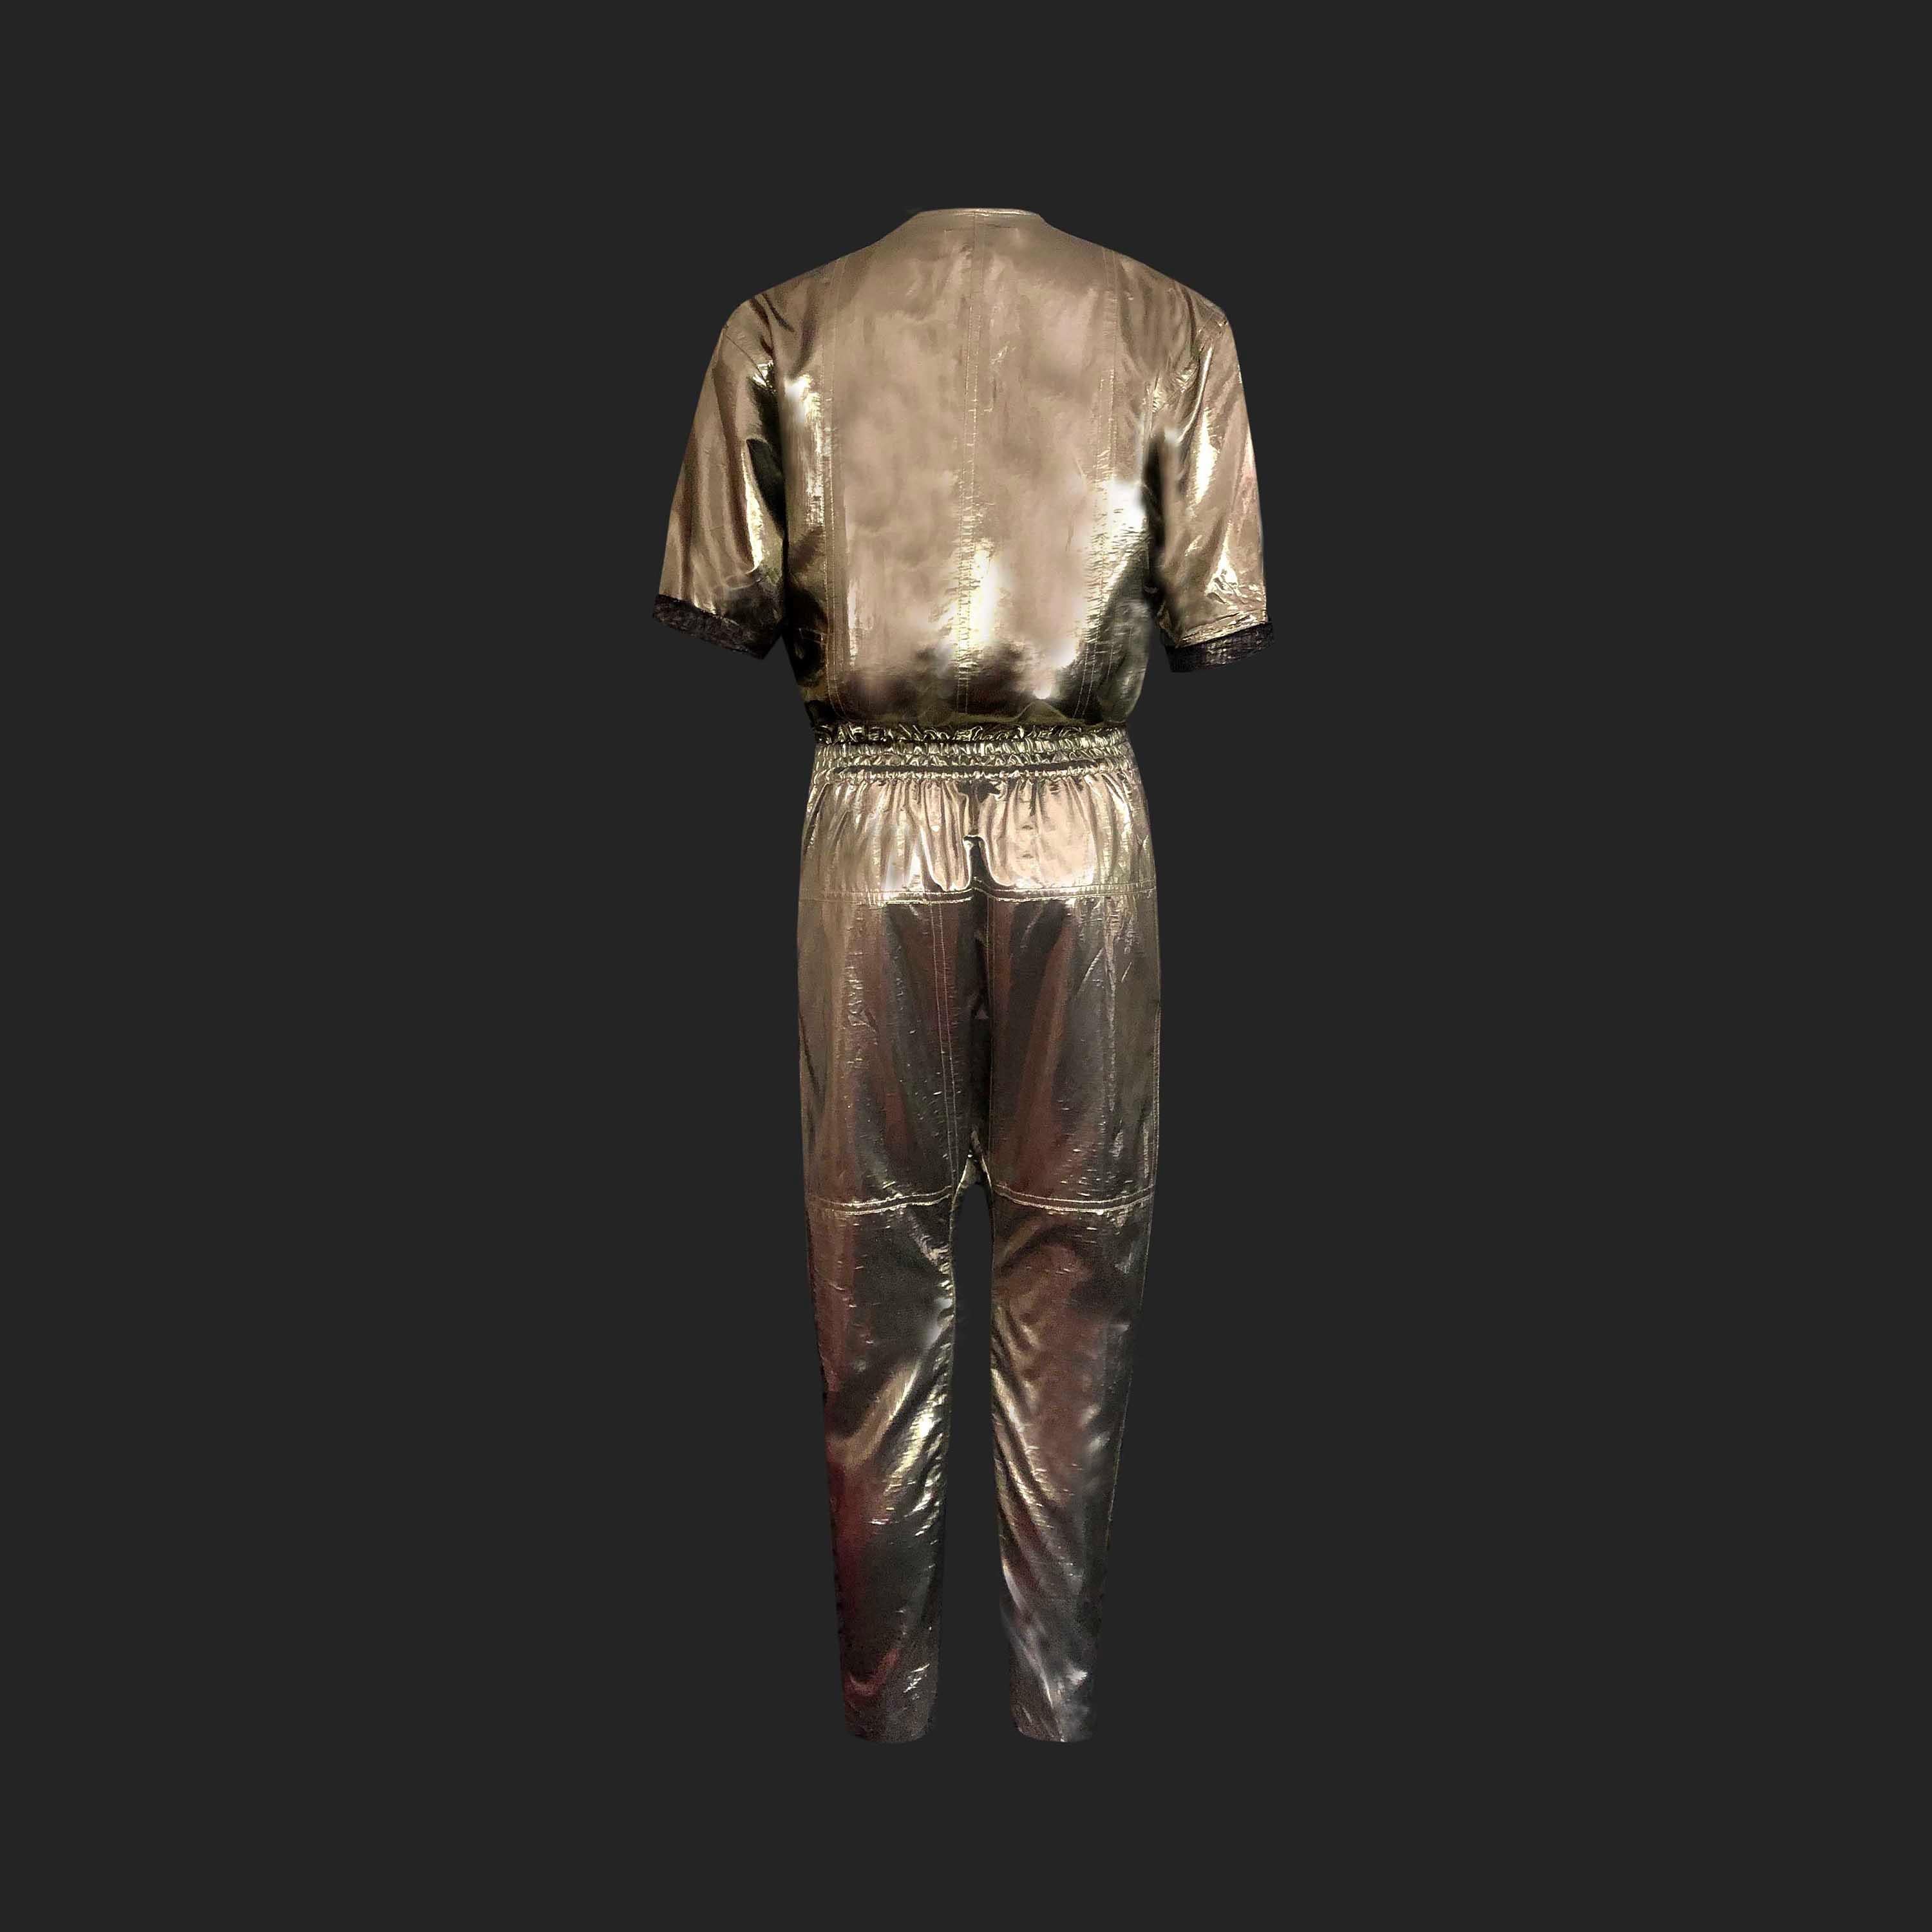 Product Details: Isabel Marant - Gold Lame Jumpsuit - Two Way Collar - Elastic Waist + Double Tie - Two Way Collar - Roll Up Sleeves - x 2 Side pockets - Harem Dropped Crutch Detail 
Label: Isabel Marant
Size: FR 34 (Fits UK 8 to UK 10)
Fabric